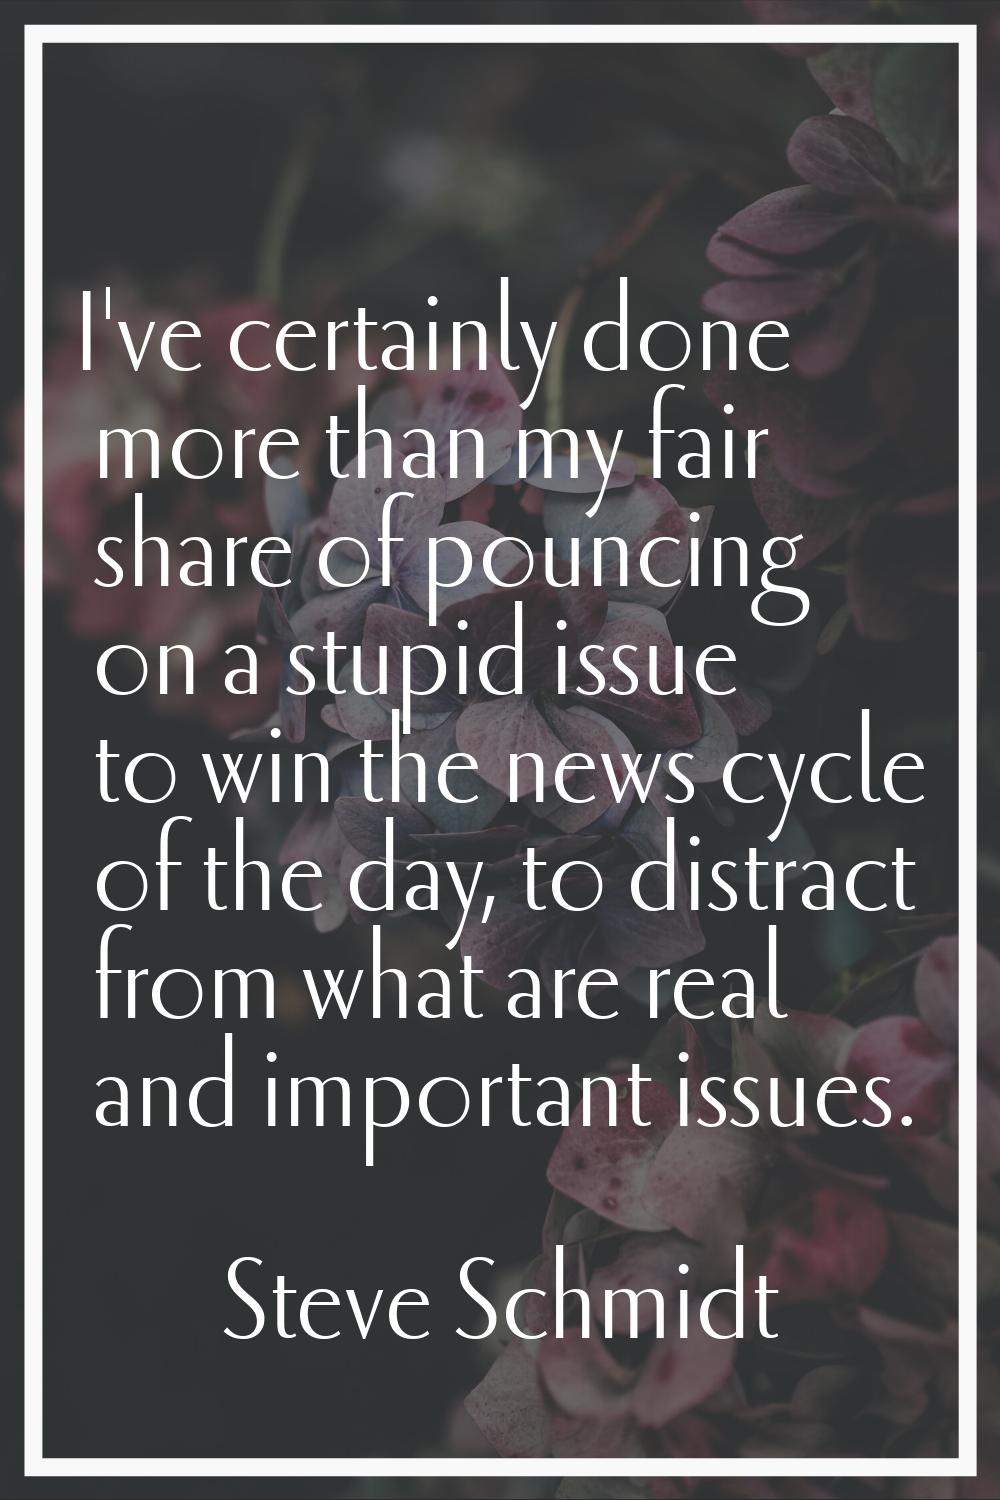 I've certainly done more than my fair share of pouncing on a stupid issue to win the news cycle of 